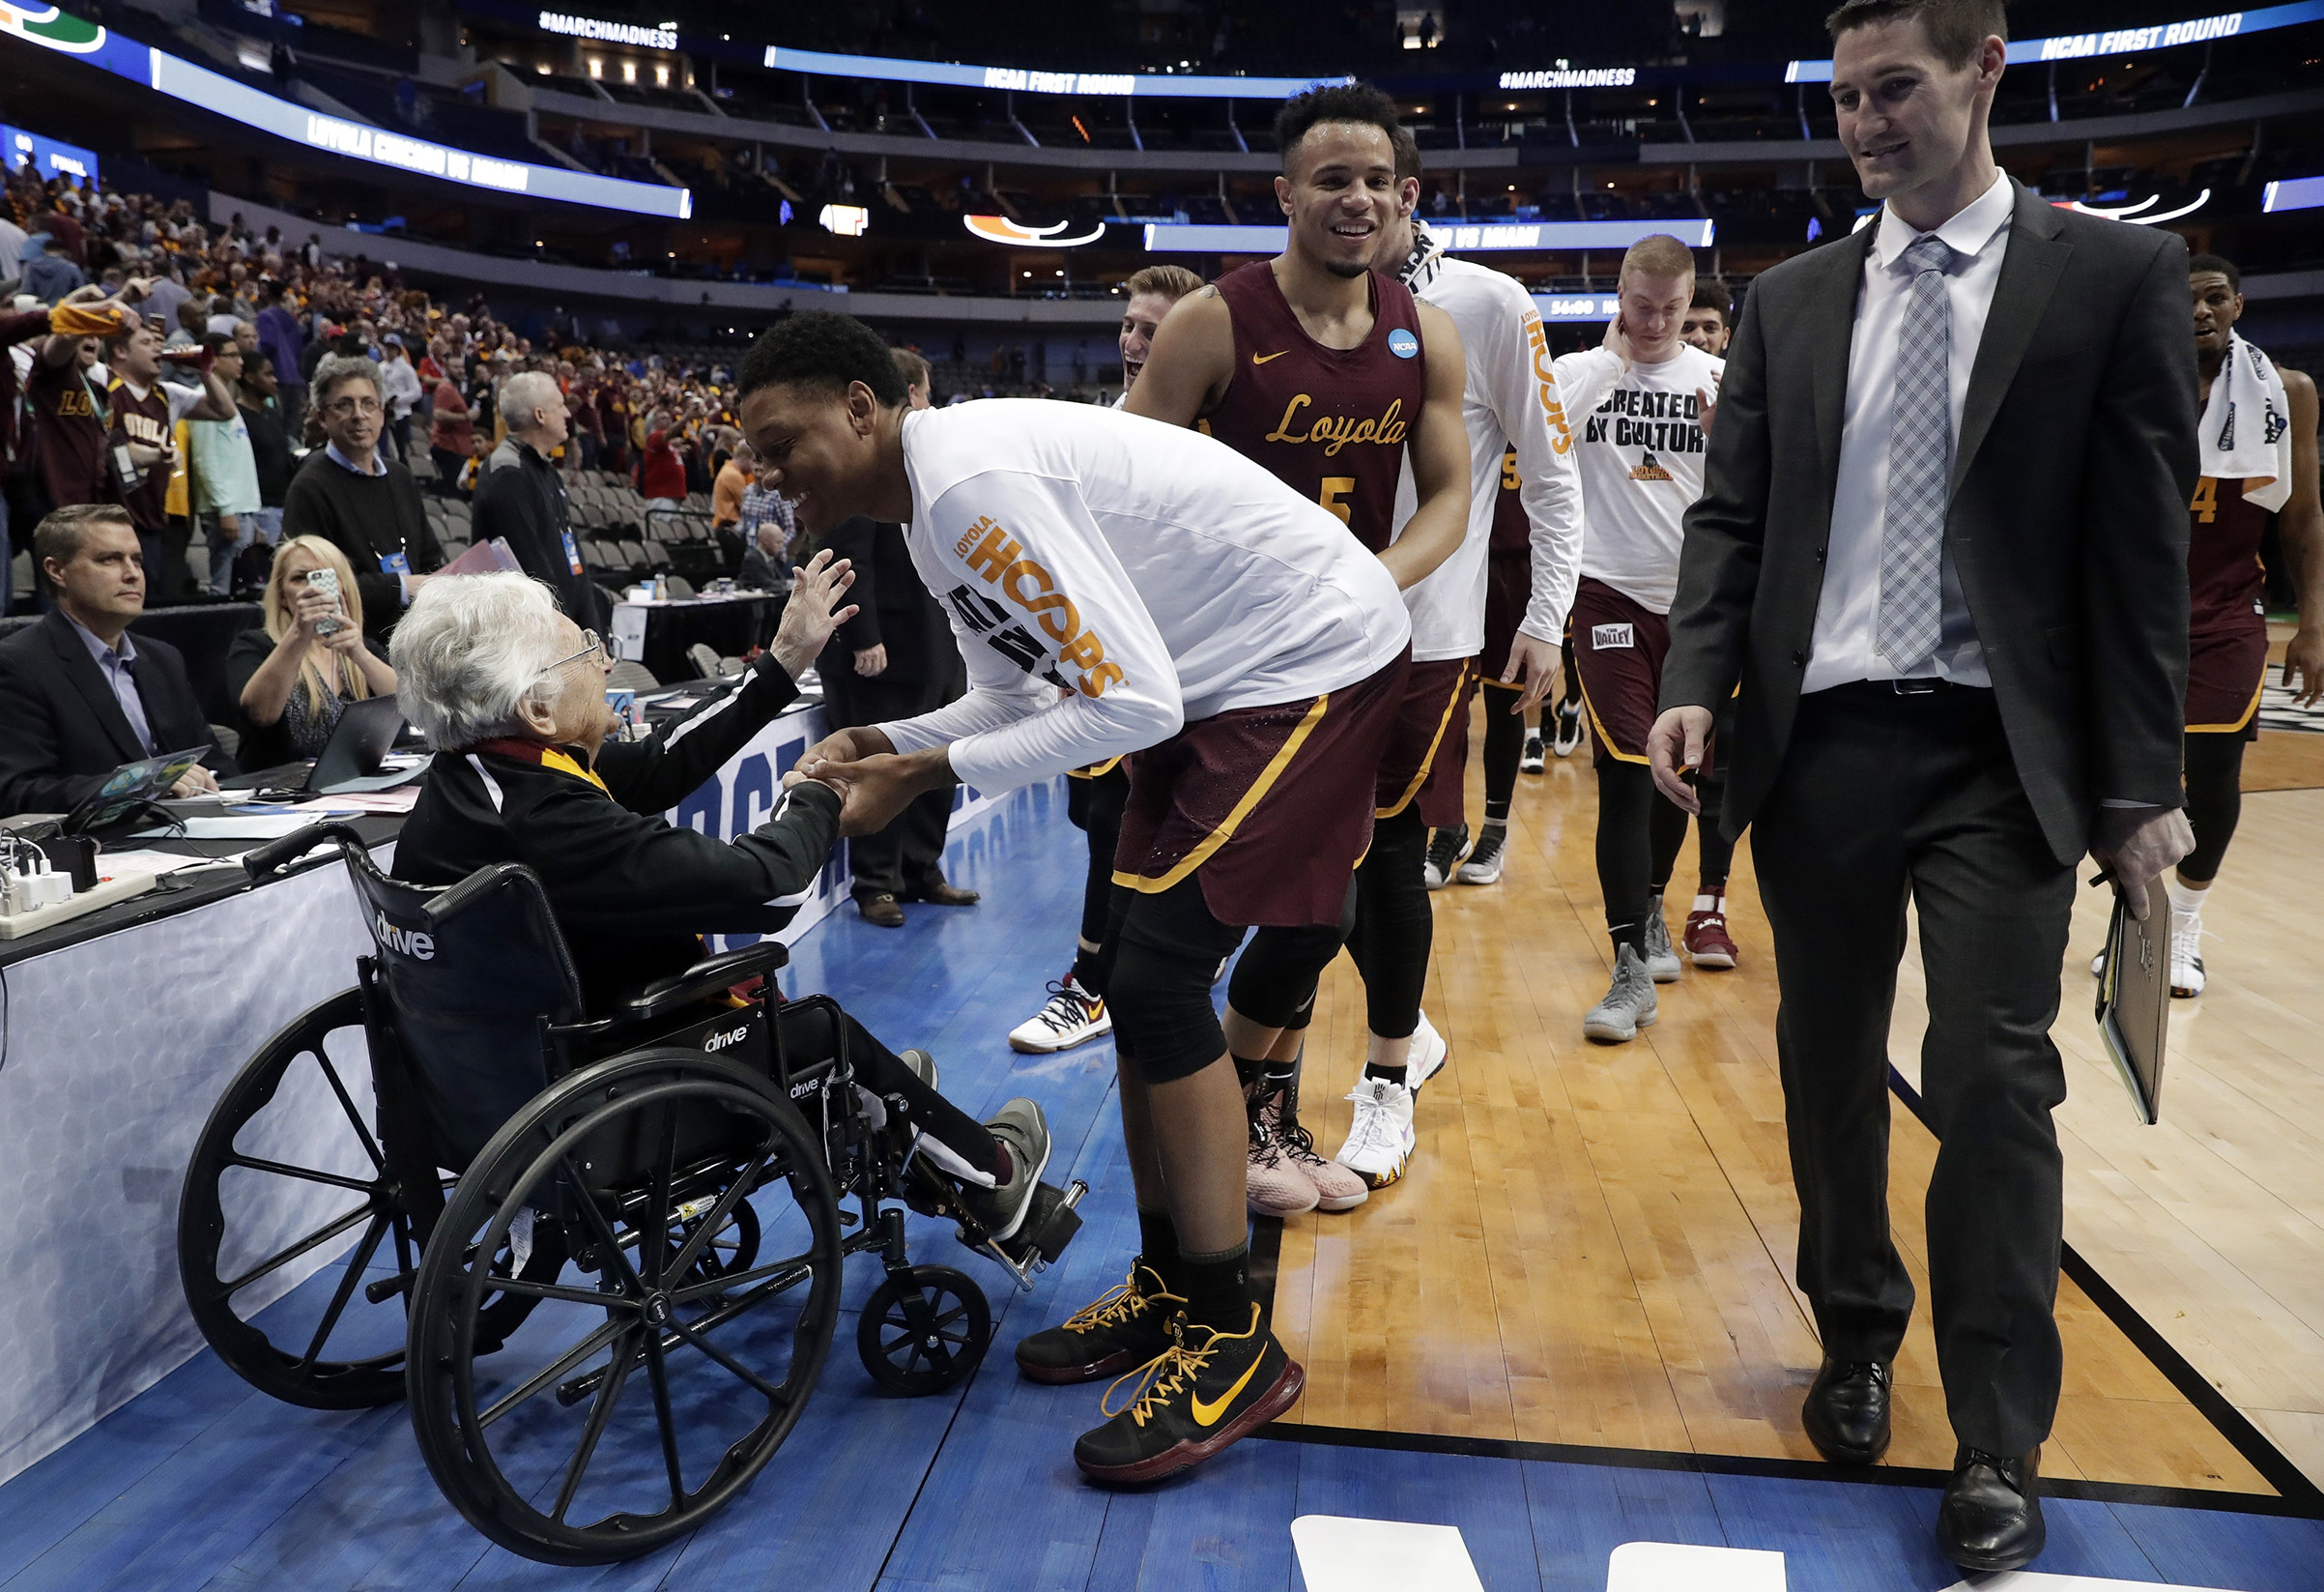 Sister Jean, the 98-year-old team chaplain for Loyola-Chicago, greets players after a win (Tony Gutierrez—AP/Shutterstock)